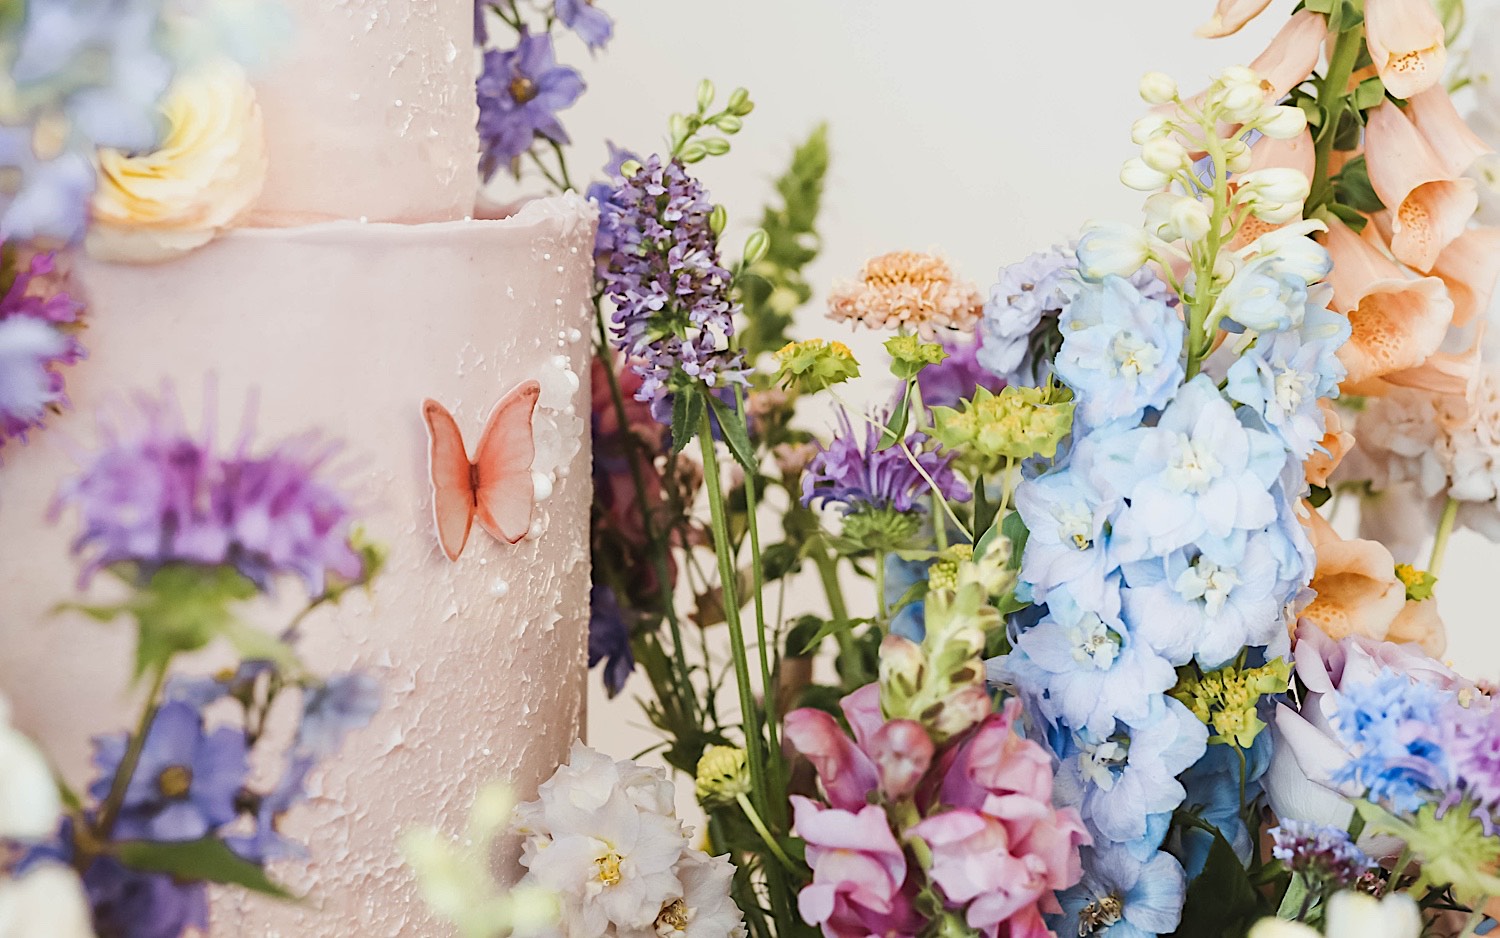 Detail photo of a wedding cake showing off the fake butterflies on it and the flowers surrounding it